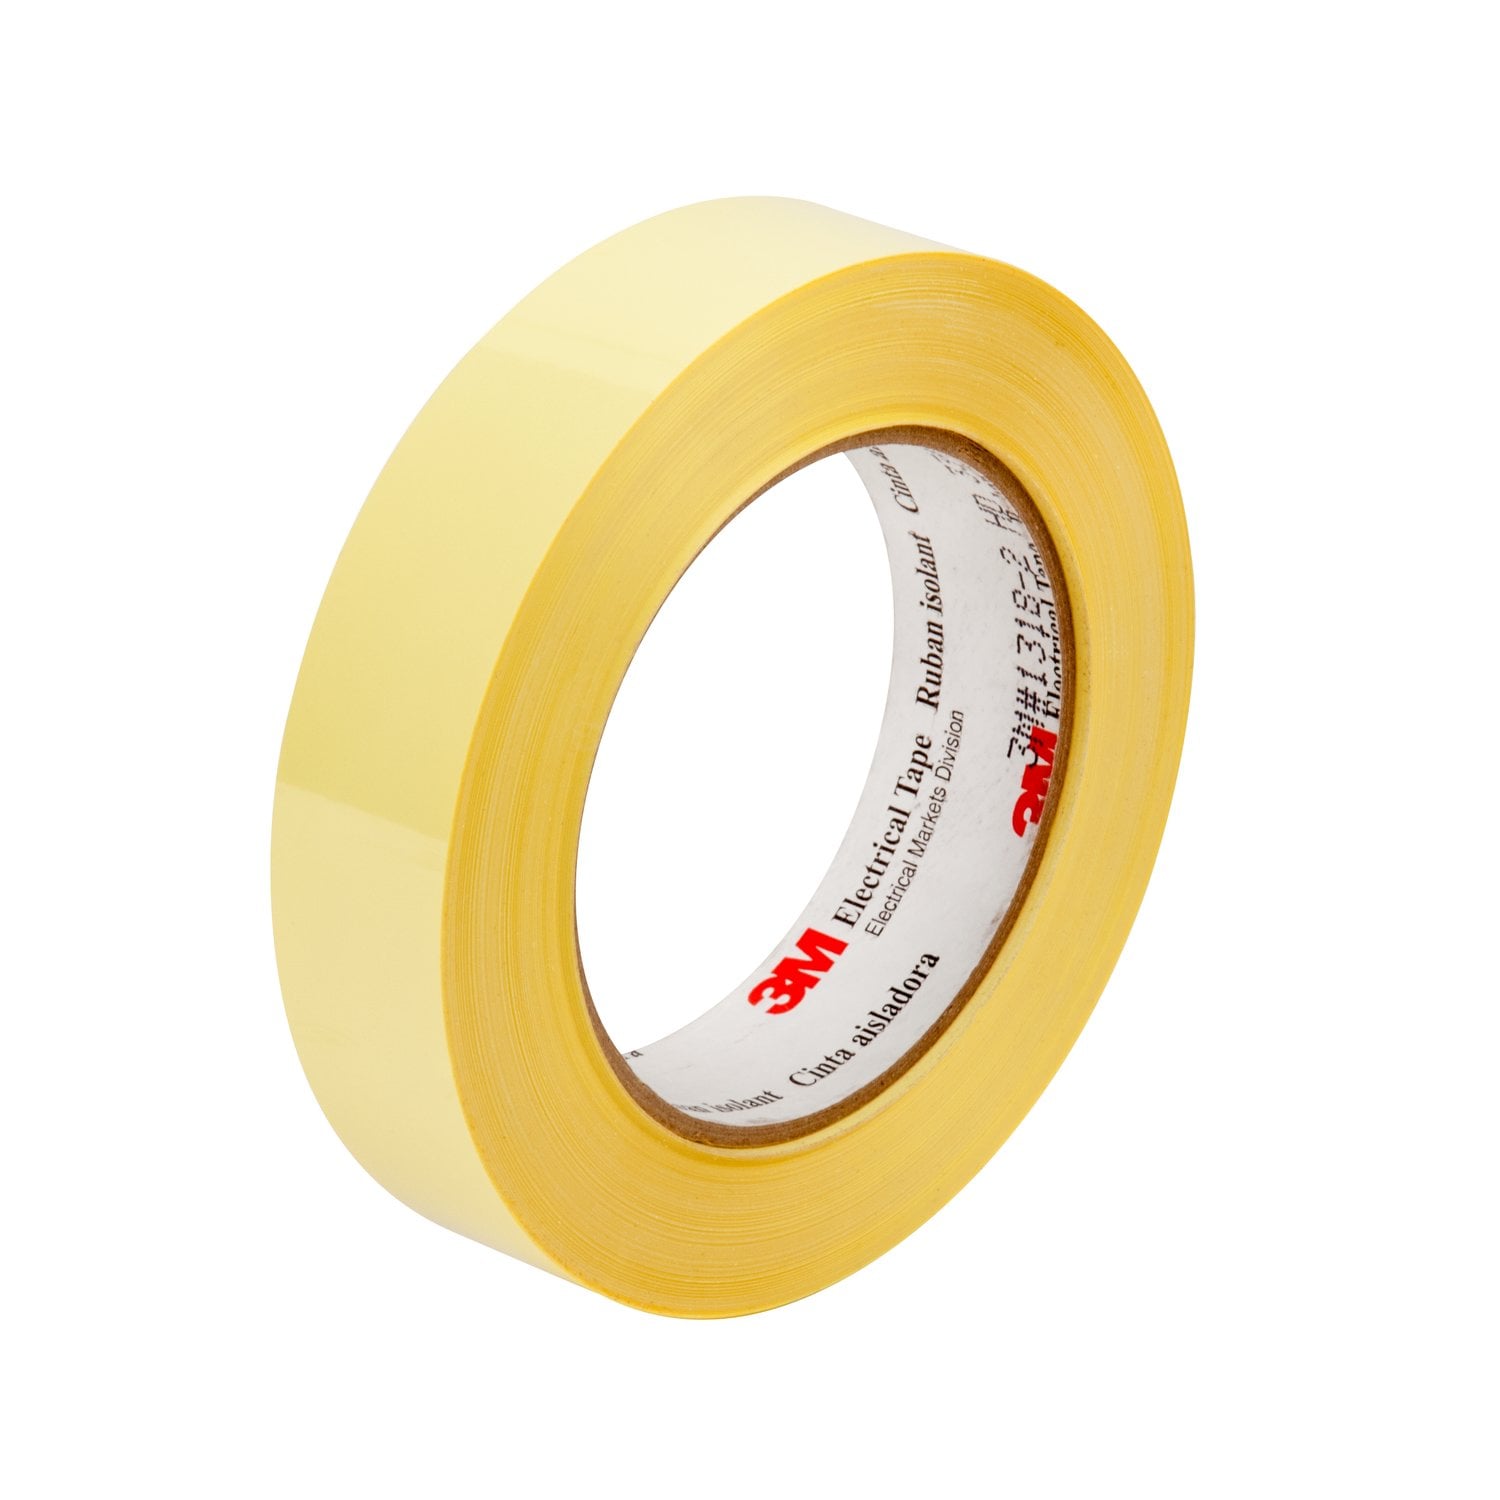 7010293626 - 3M Polyester Film Electrical Tape 1350F-2, 50M, Yellow, 24 in X 72 yds,
3-in paper core, Log roll, 1 Roll/Case